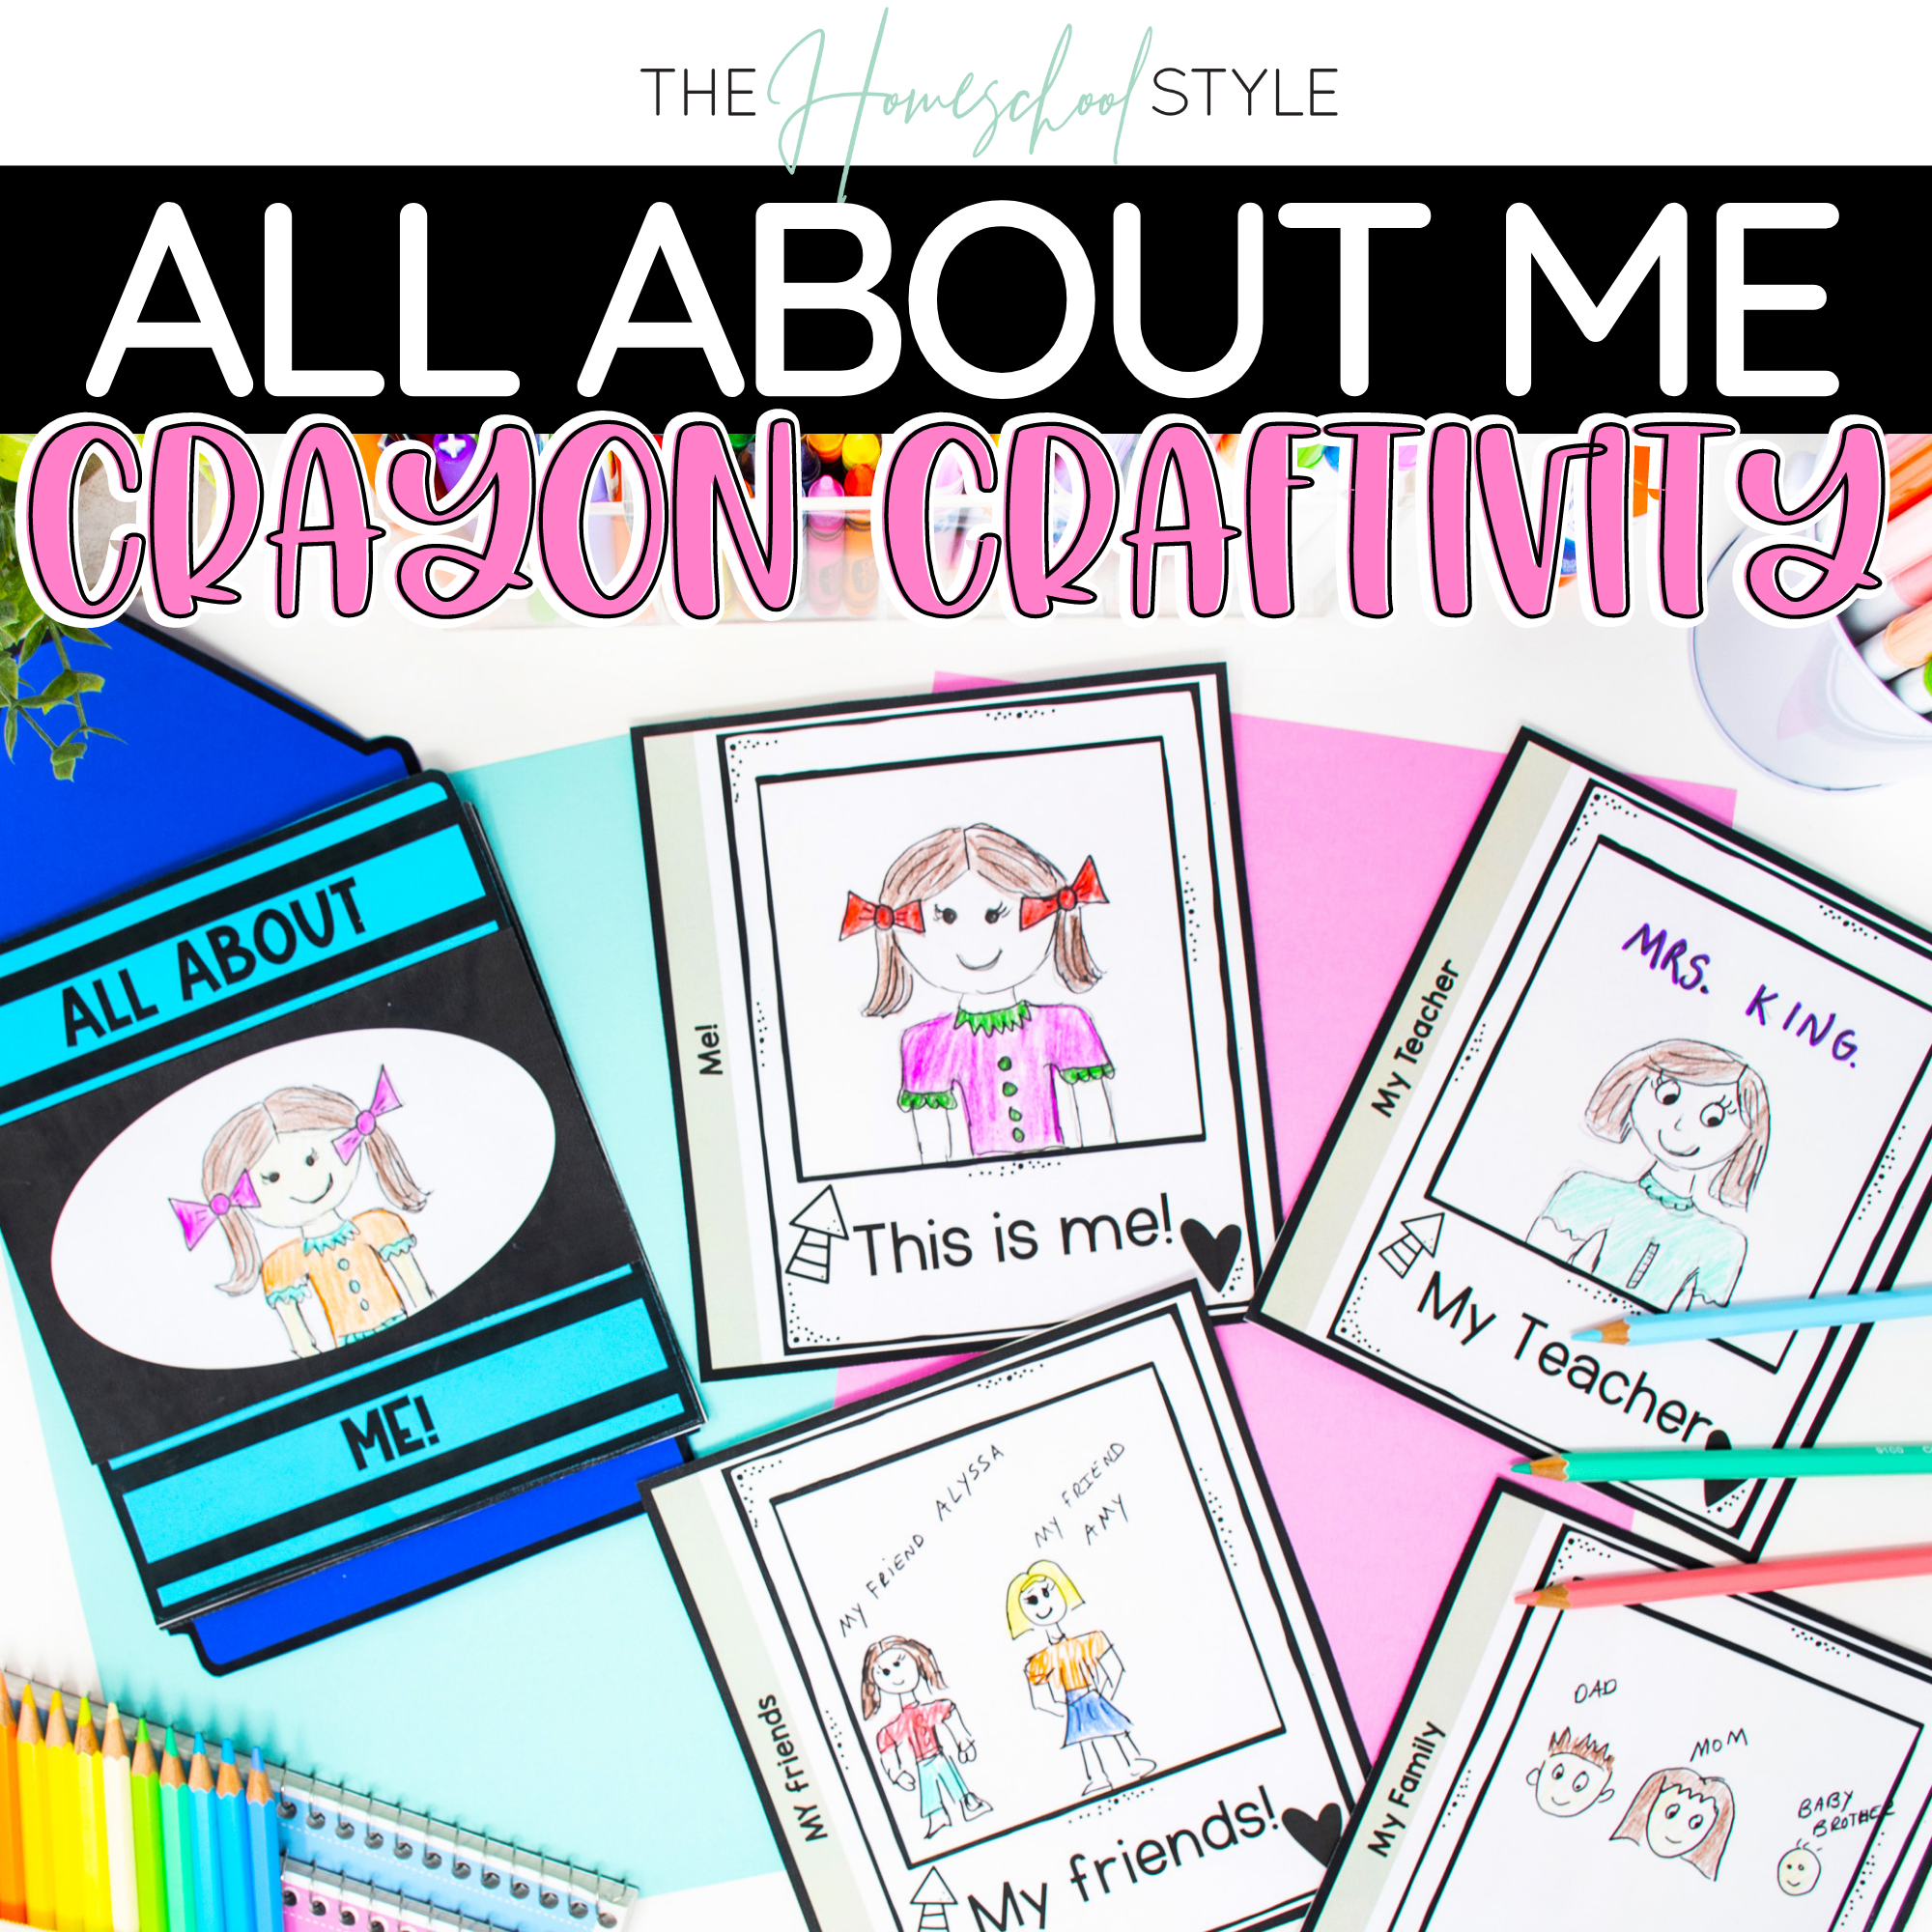 All About Me Writing Activity & Crayon Craft | Back To School Craftivity